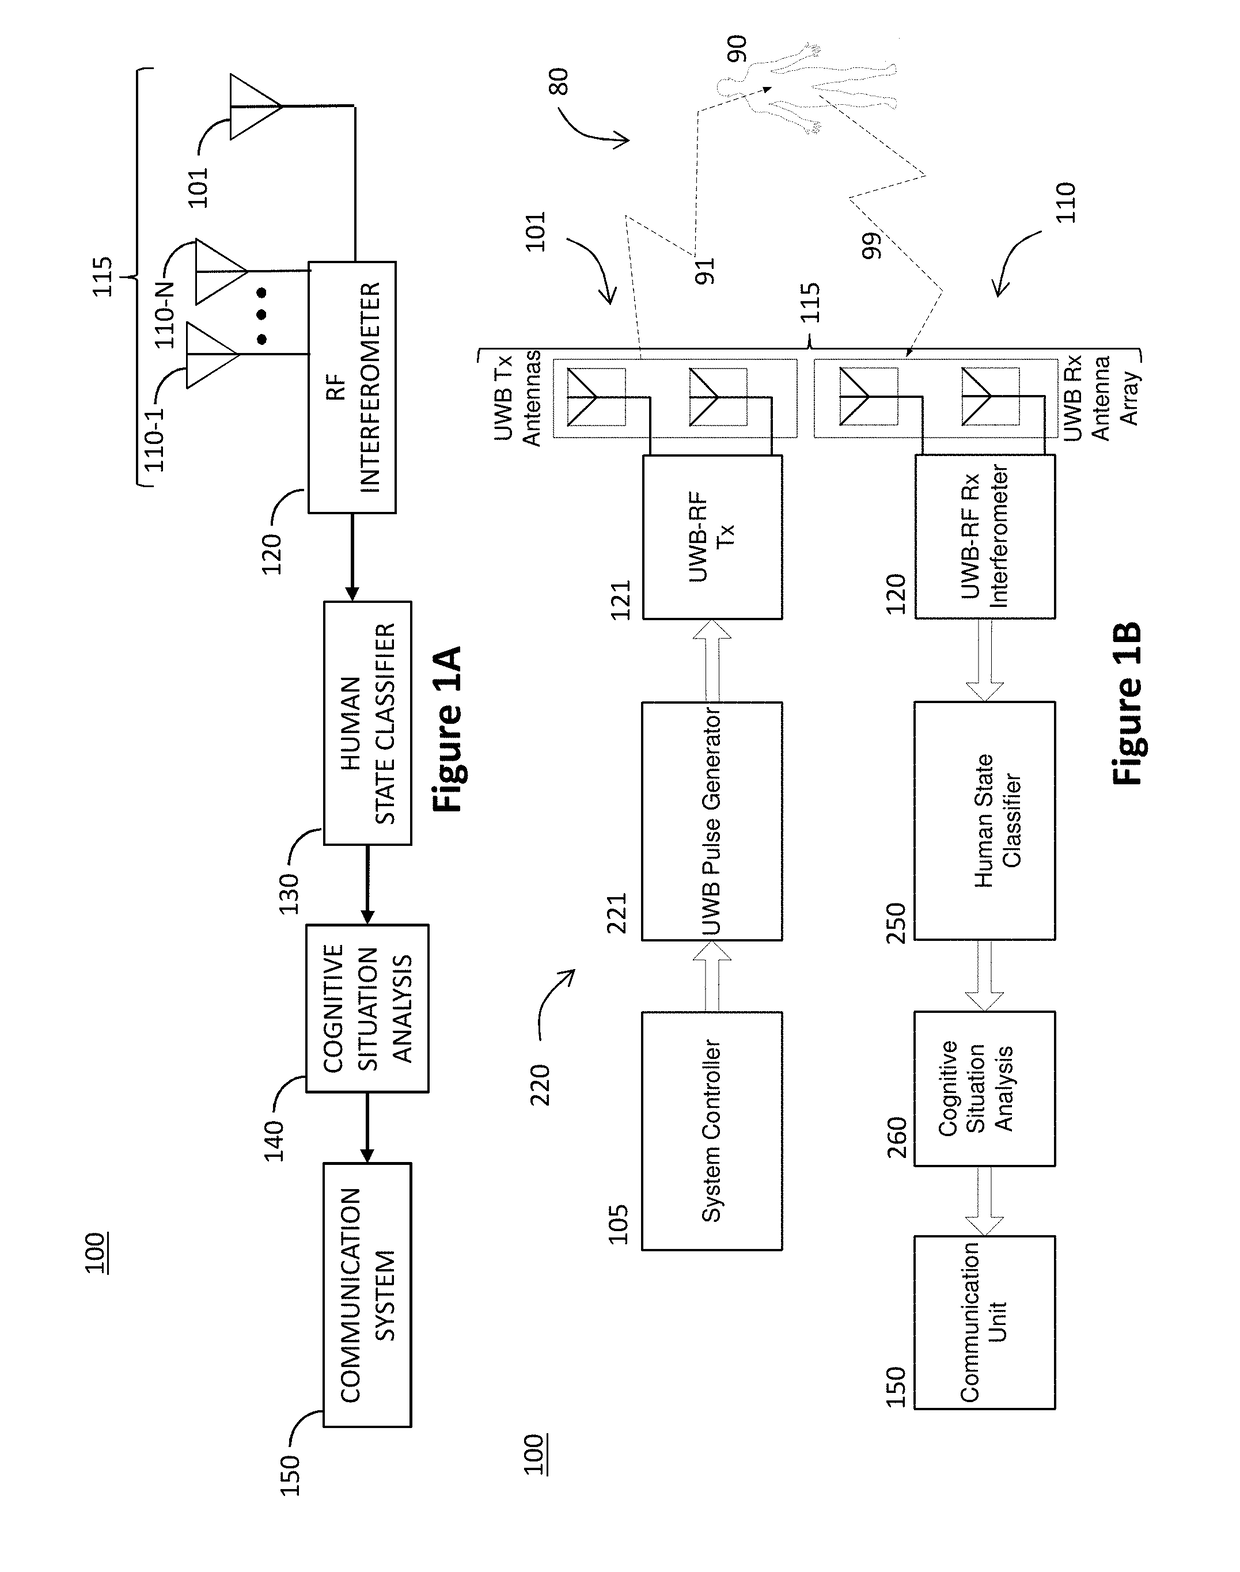 Human respiration feature extraction in personal emergency response systems and methods